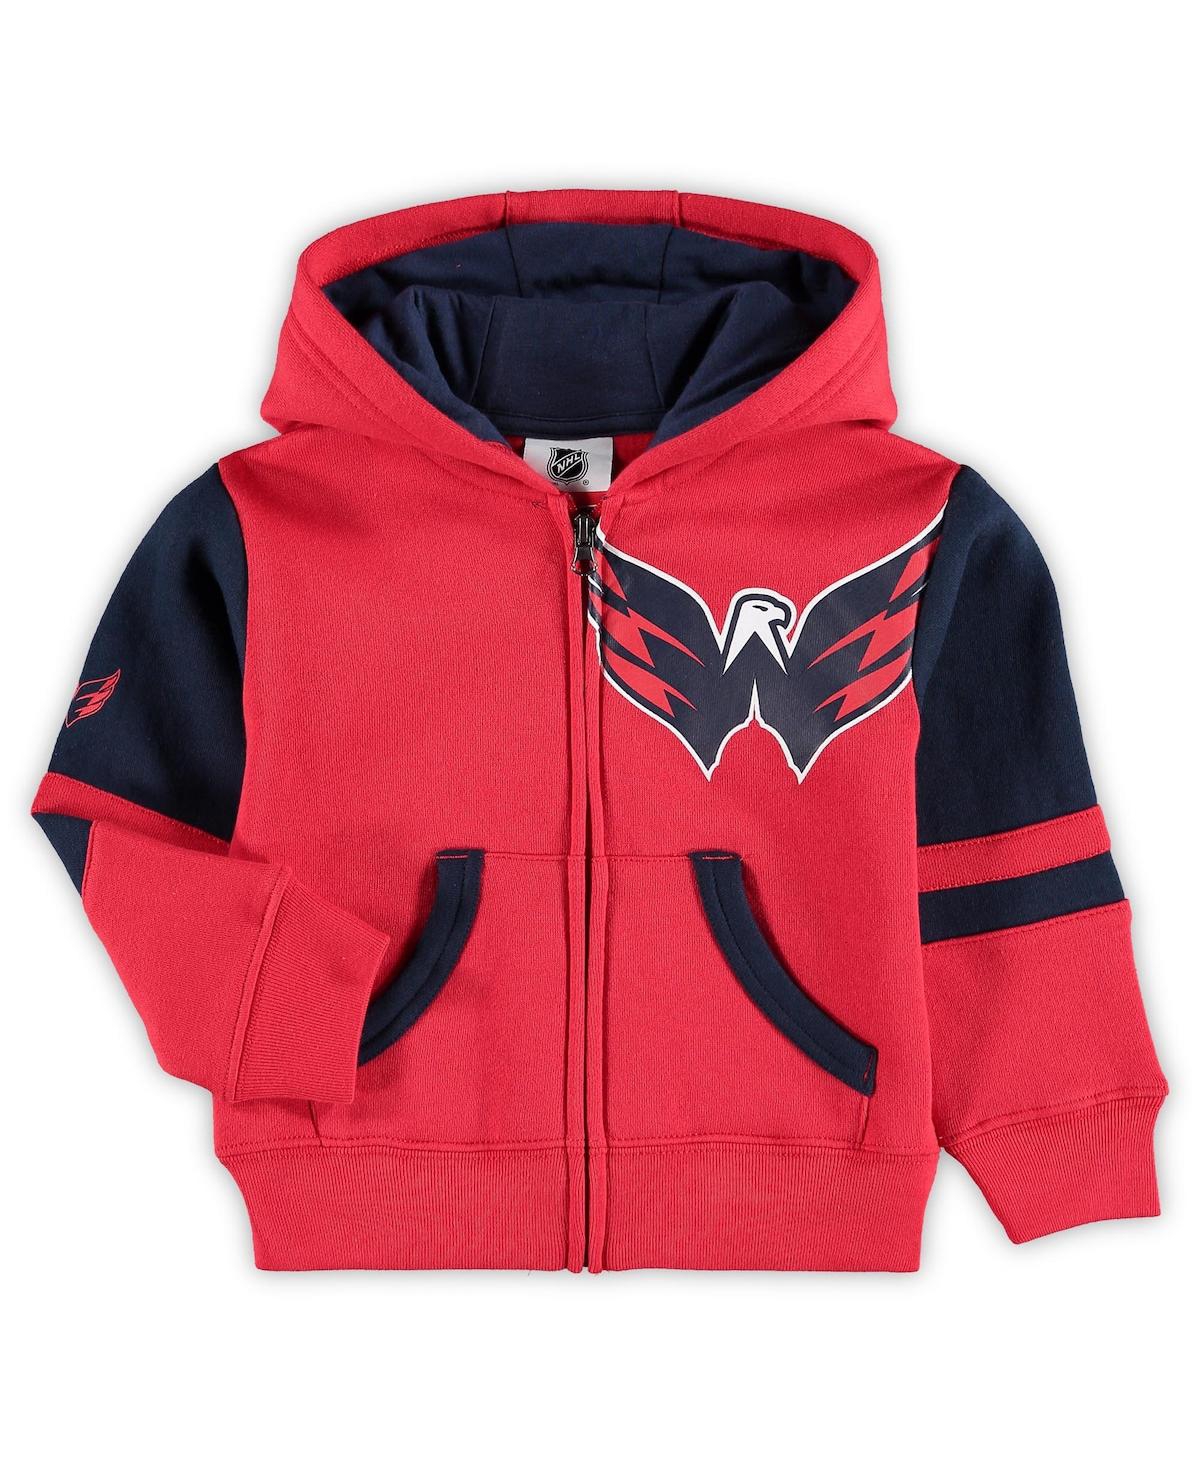 OUTERSTUFF BOYS AND GIRLS TODDLER OUTERSTUFF RED WASHINGTON CAPITALS FACEOFF FLEECE FULL-ZIP HOODIE JACKET